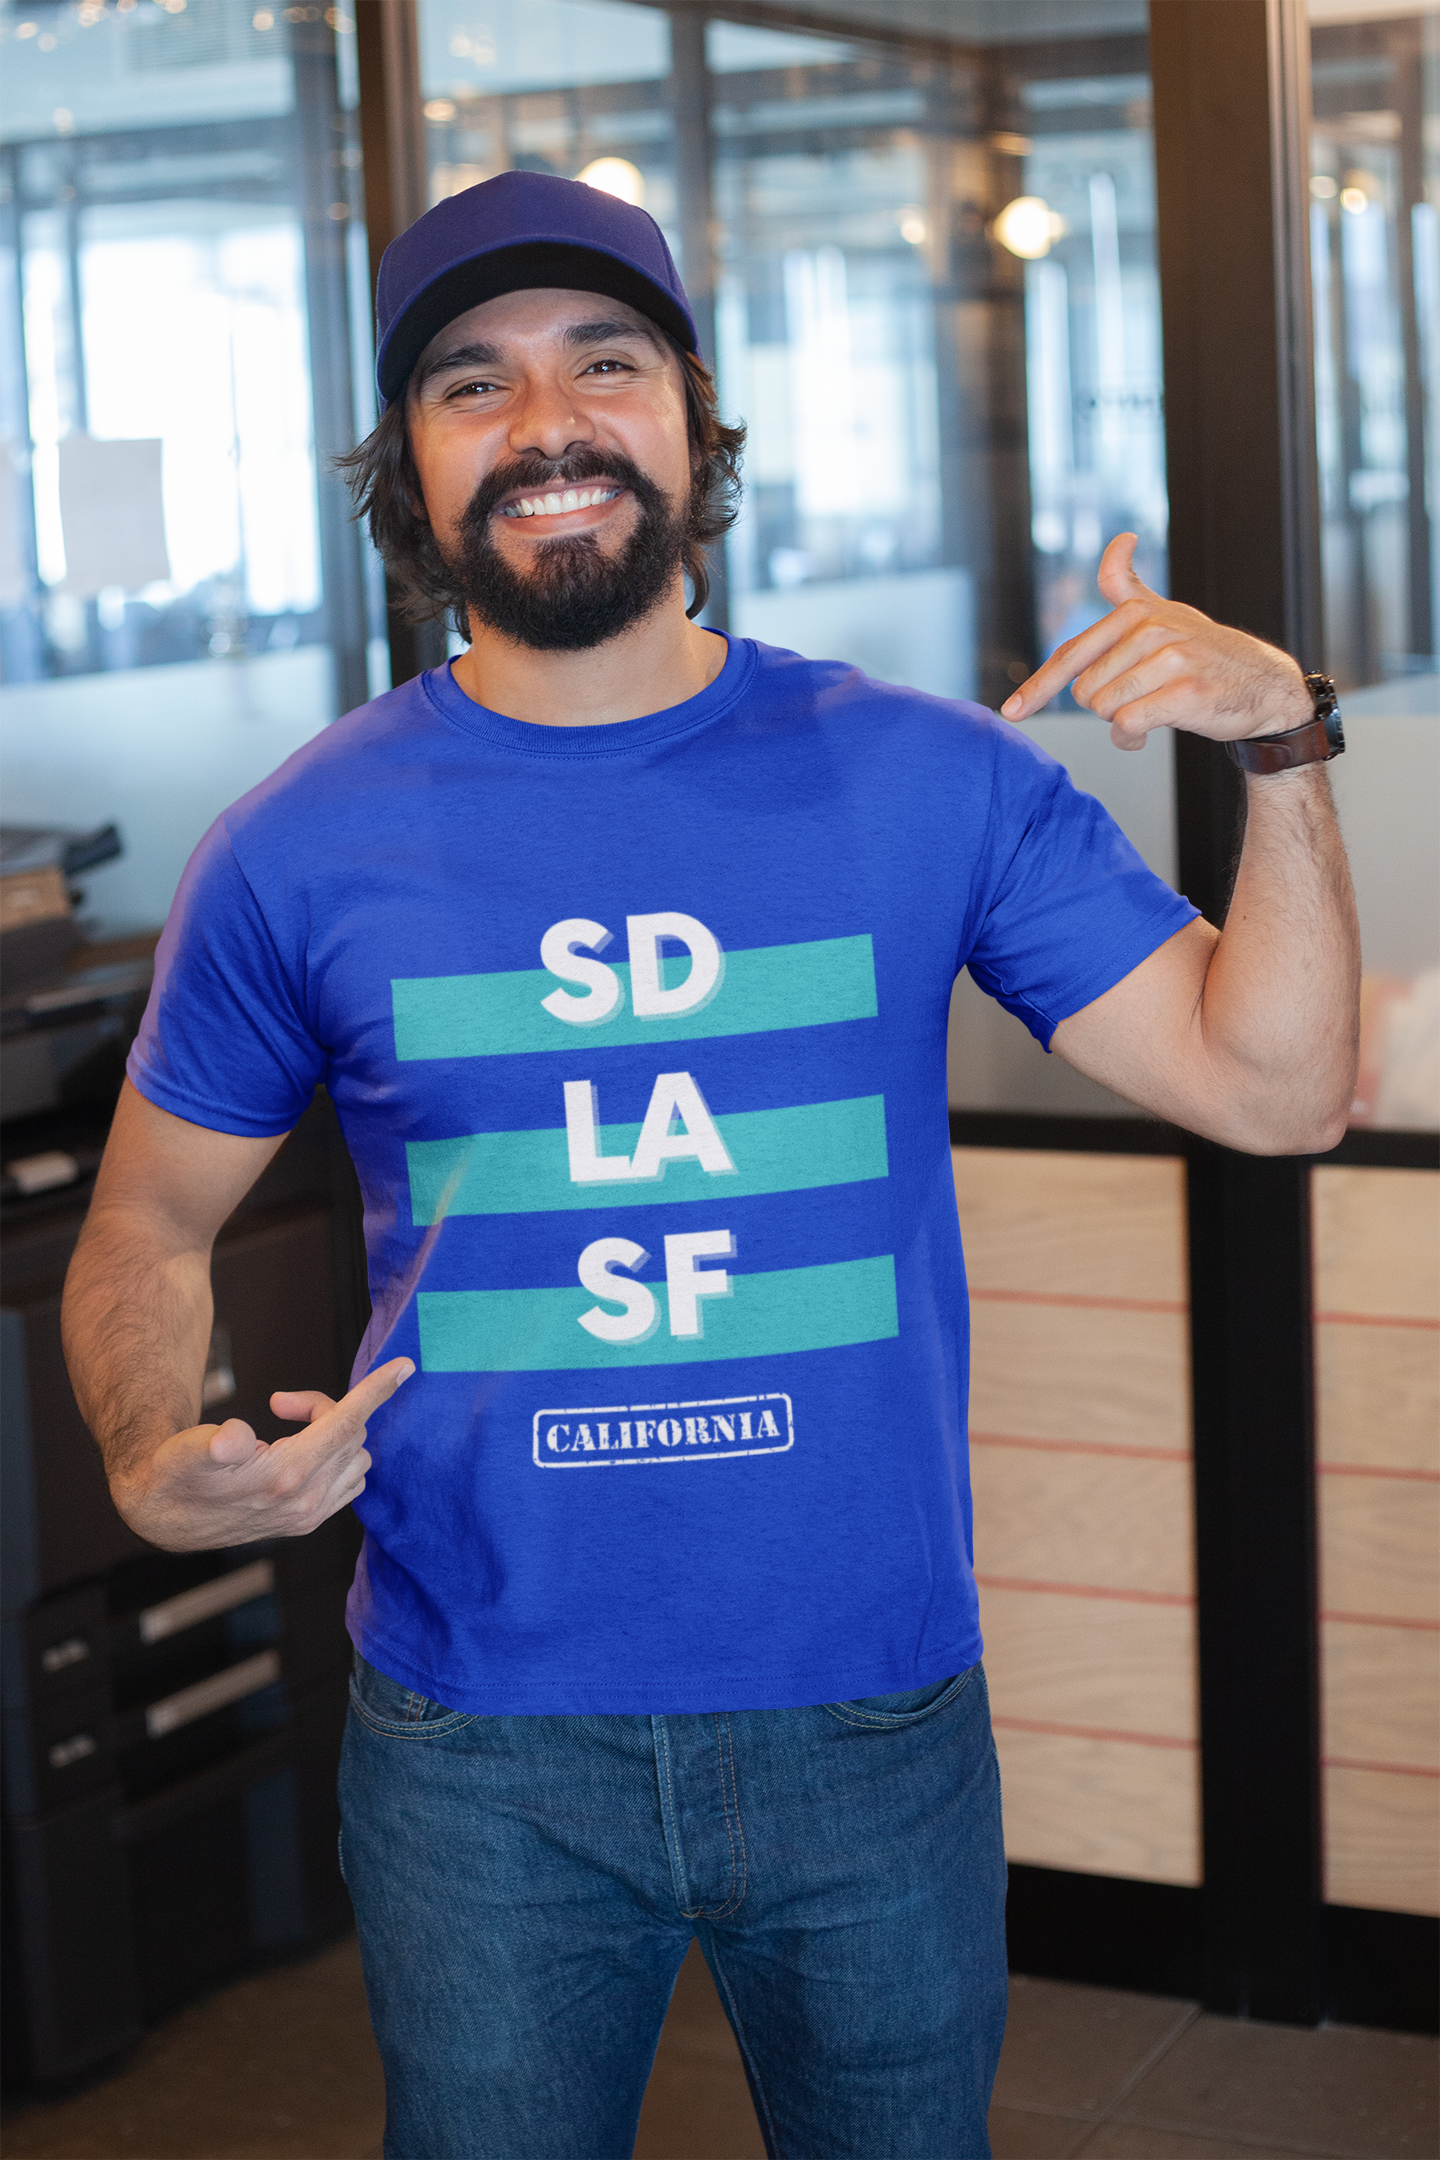 Bearded guy pointing at his blue SD LA SF t-shirt inside of office buiding.